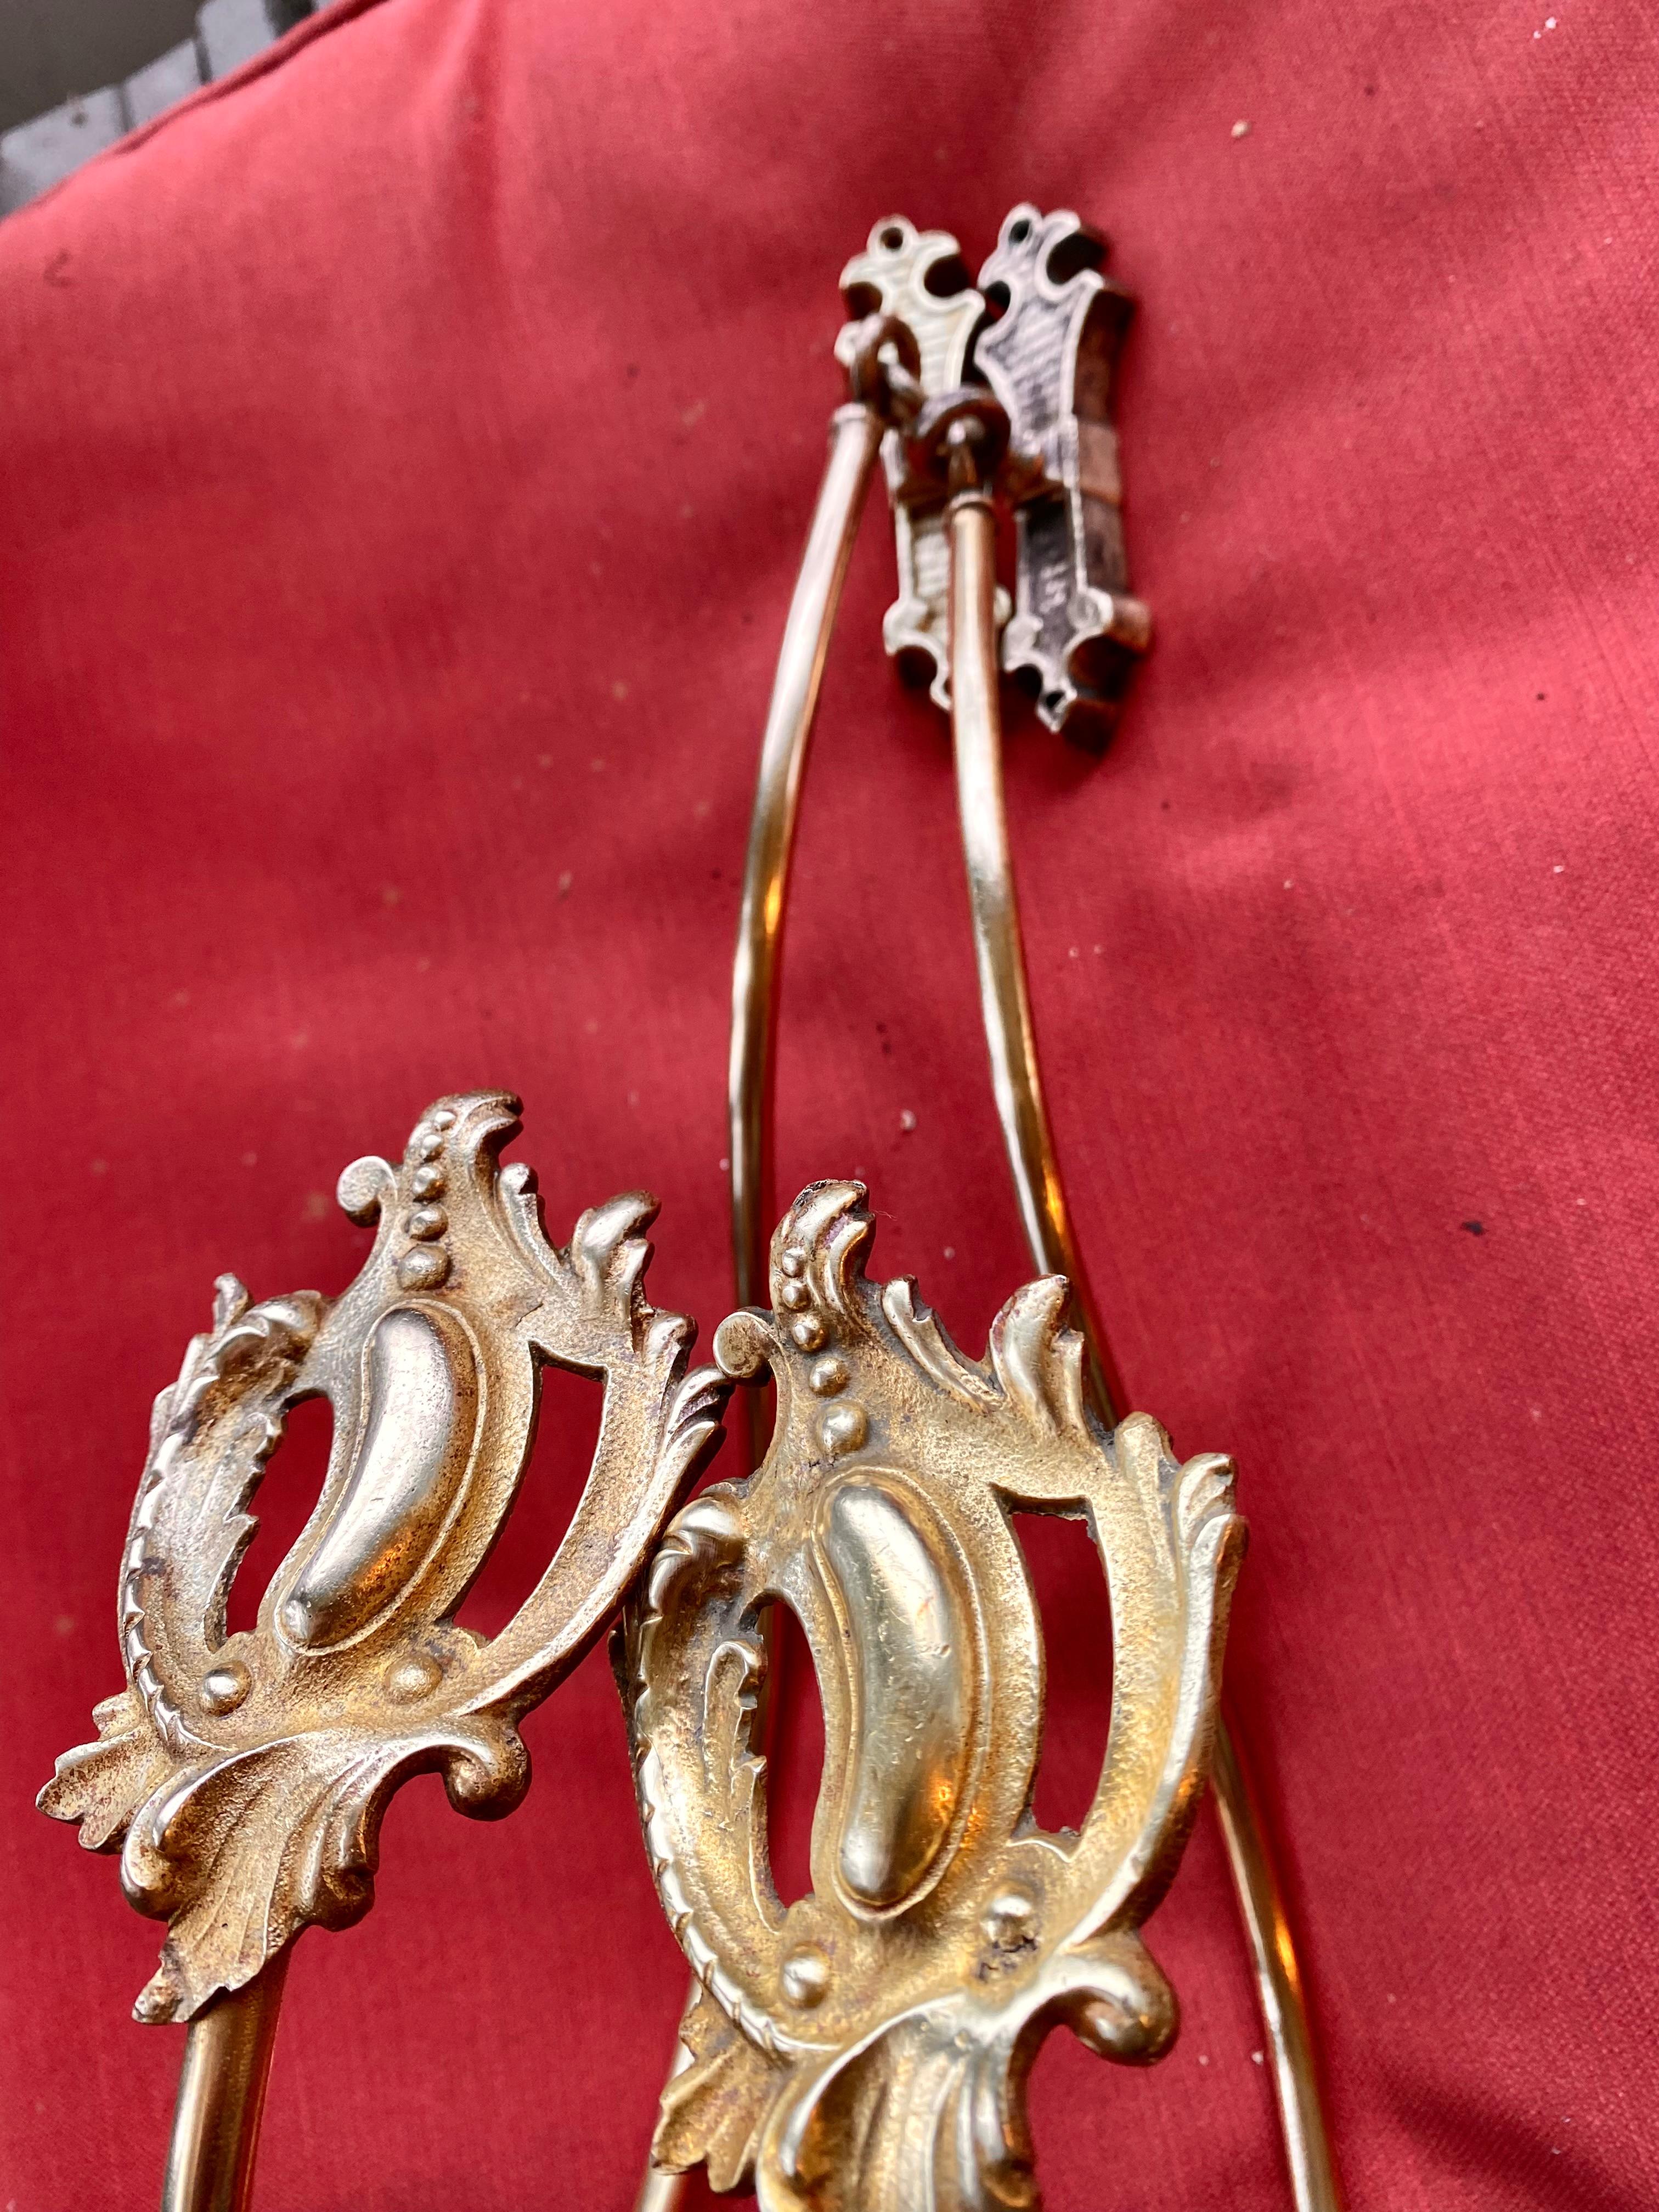 Pair of French Antique Gilt Bronze Curtain
Tie- Backs. With Maker's Mark.
Pair of sculpted gilt bronze curtain hooks / tie-backs, decorated with acanthus leaves, floral details, and volutes. 19th century.
On the verso is the Maker's Mark stamped